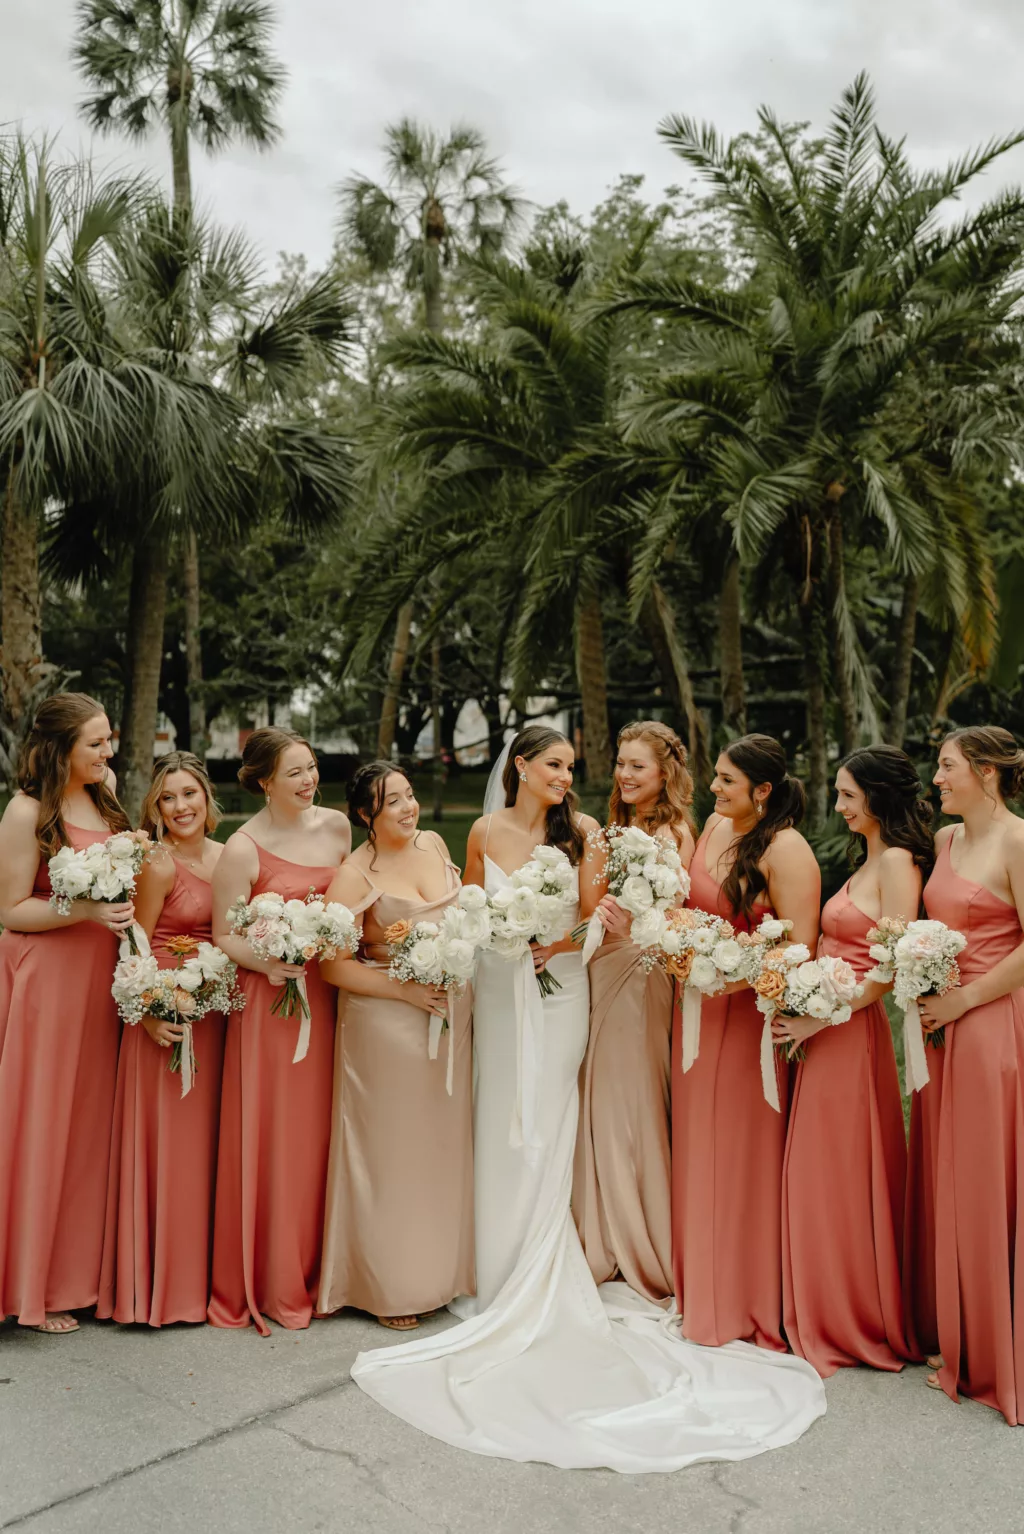 Matching Pink and Champagne Chiffon Bridesmaids Dress Ideas | Elegant White Roses, Baby's Breath, Ranunculus, Pink Roses, and Chrysanthemums Spring Wedding Bouquet Inspiration | Tampa HMUA Femme Akoi Beauty Studio